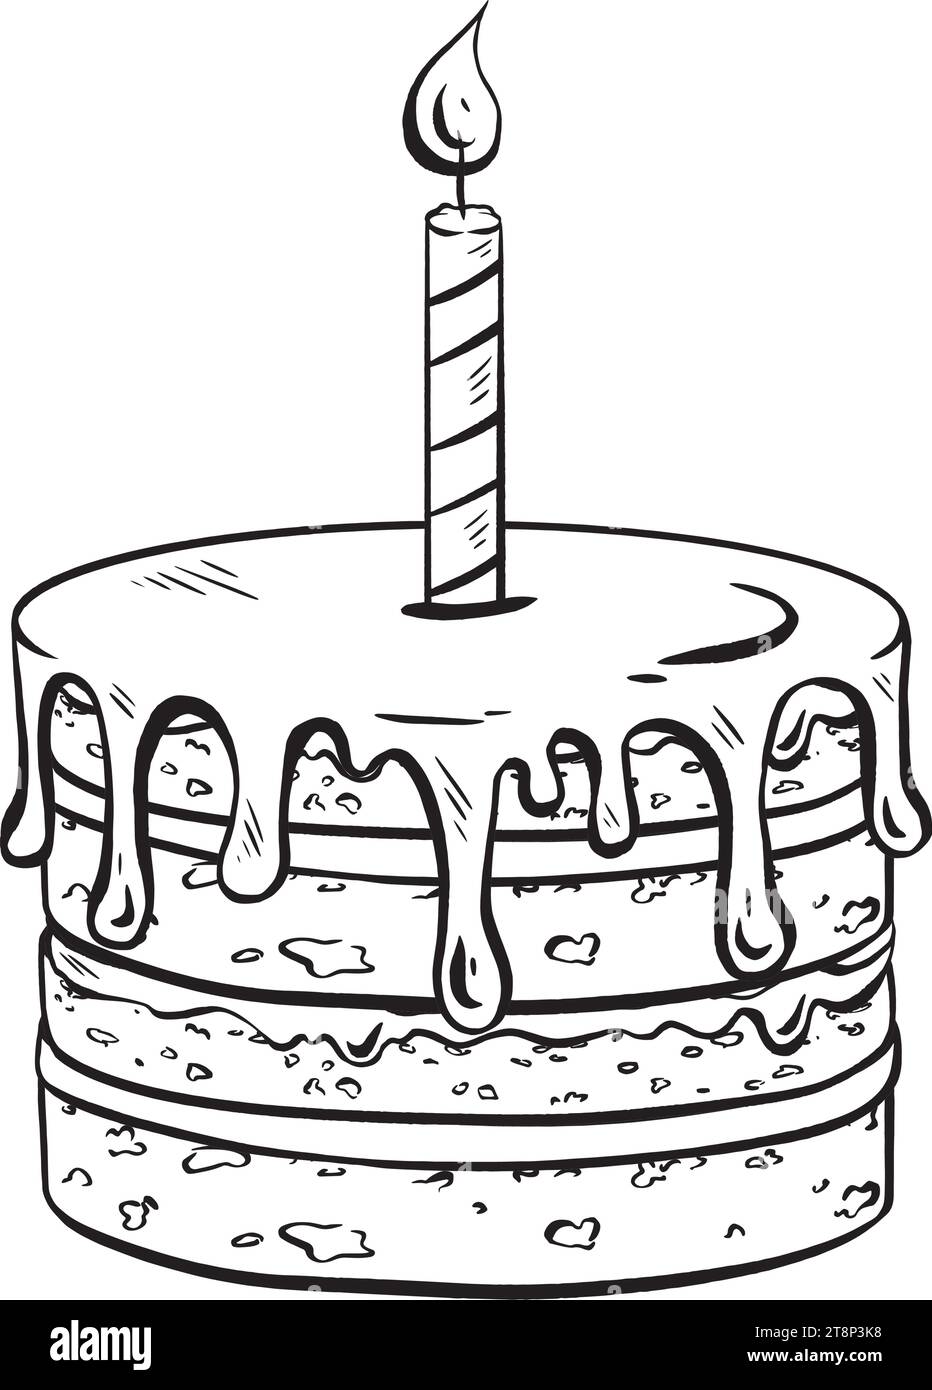 Hand-drawn vector. Ink. Classic cake with a lit candle. Layers soaked in delicious cream, dripping glaze. Tall striped candle burning brightly Stock Vector